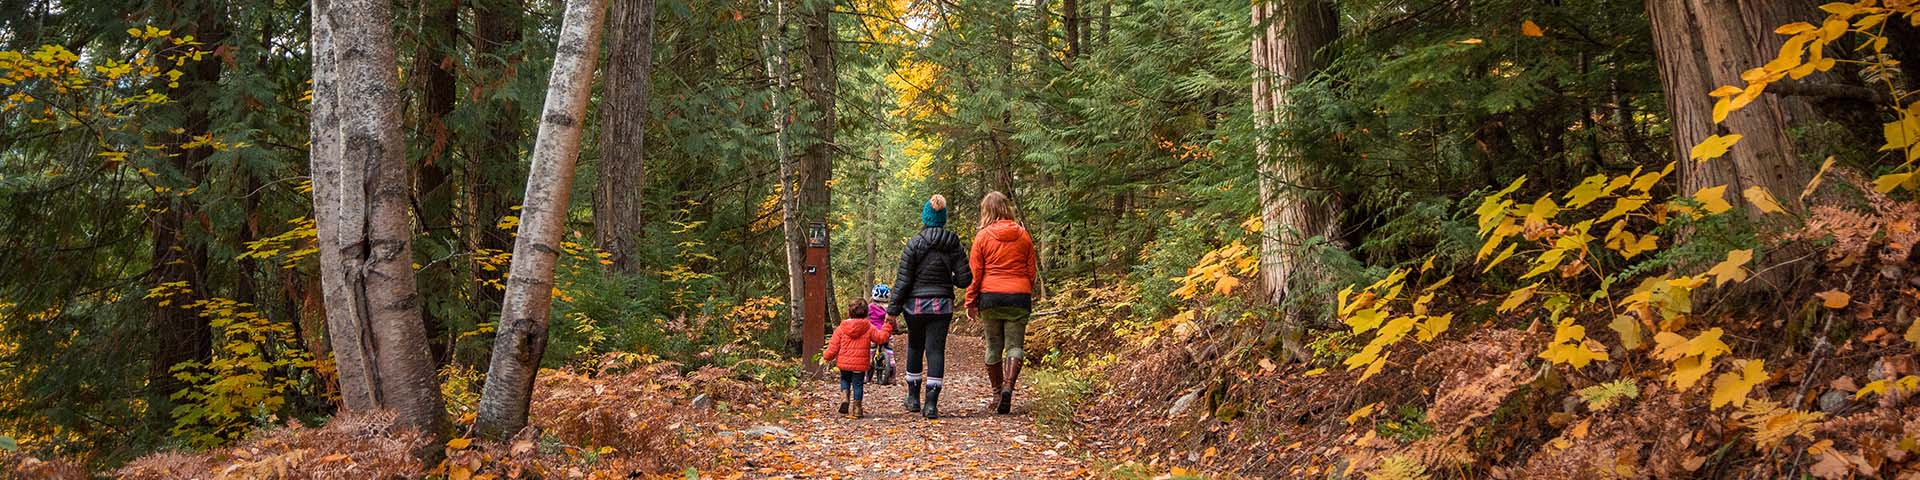 Small Family hiking in the woods